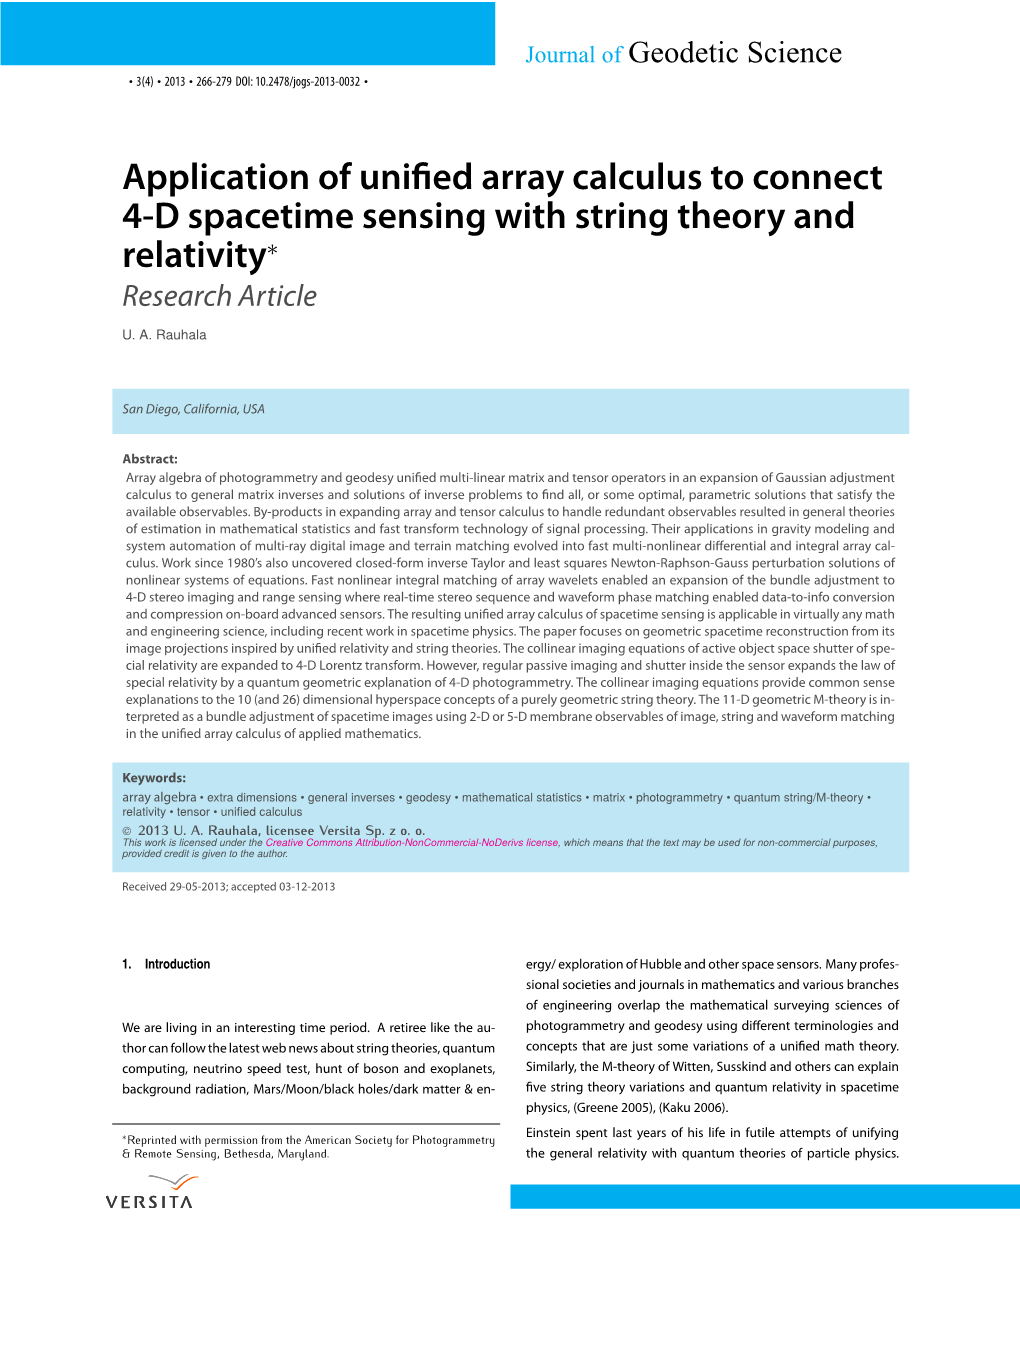 Application of Unified Array Calculus to Connect 4-D Spacetime Sensing with String Theory and Relativity∗ Research Article